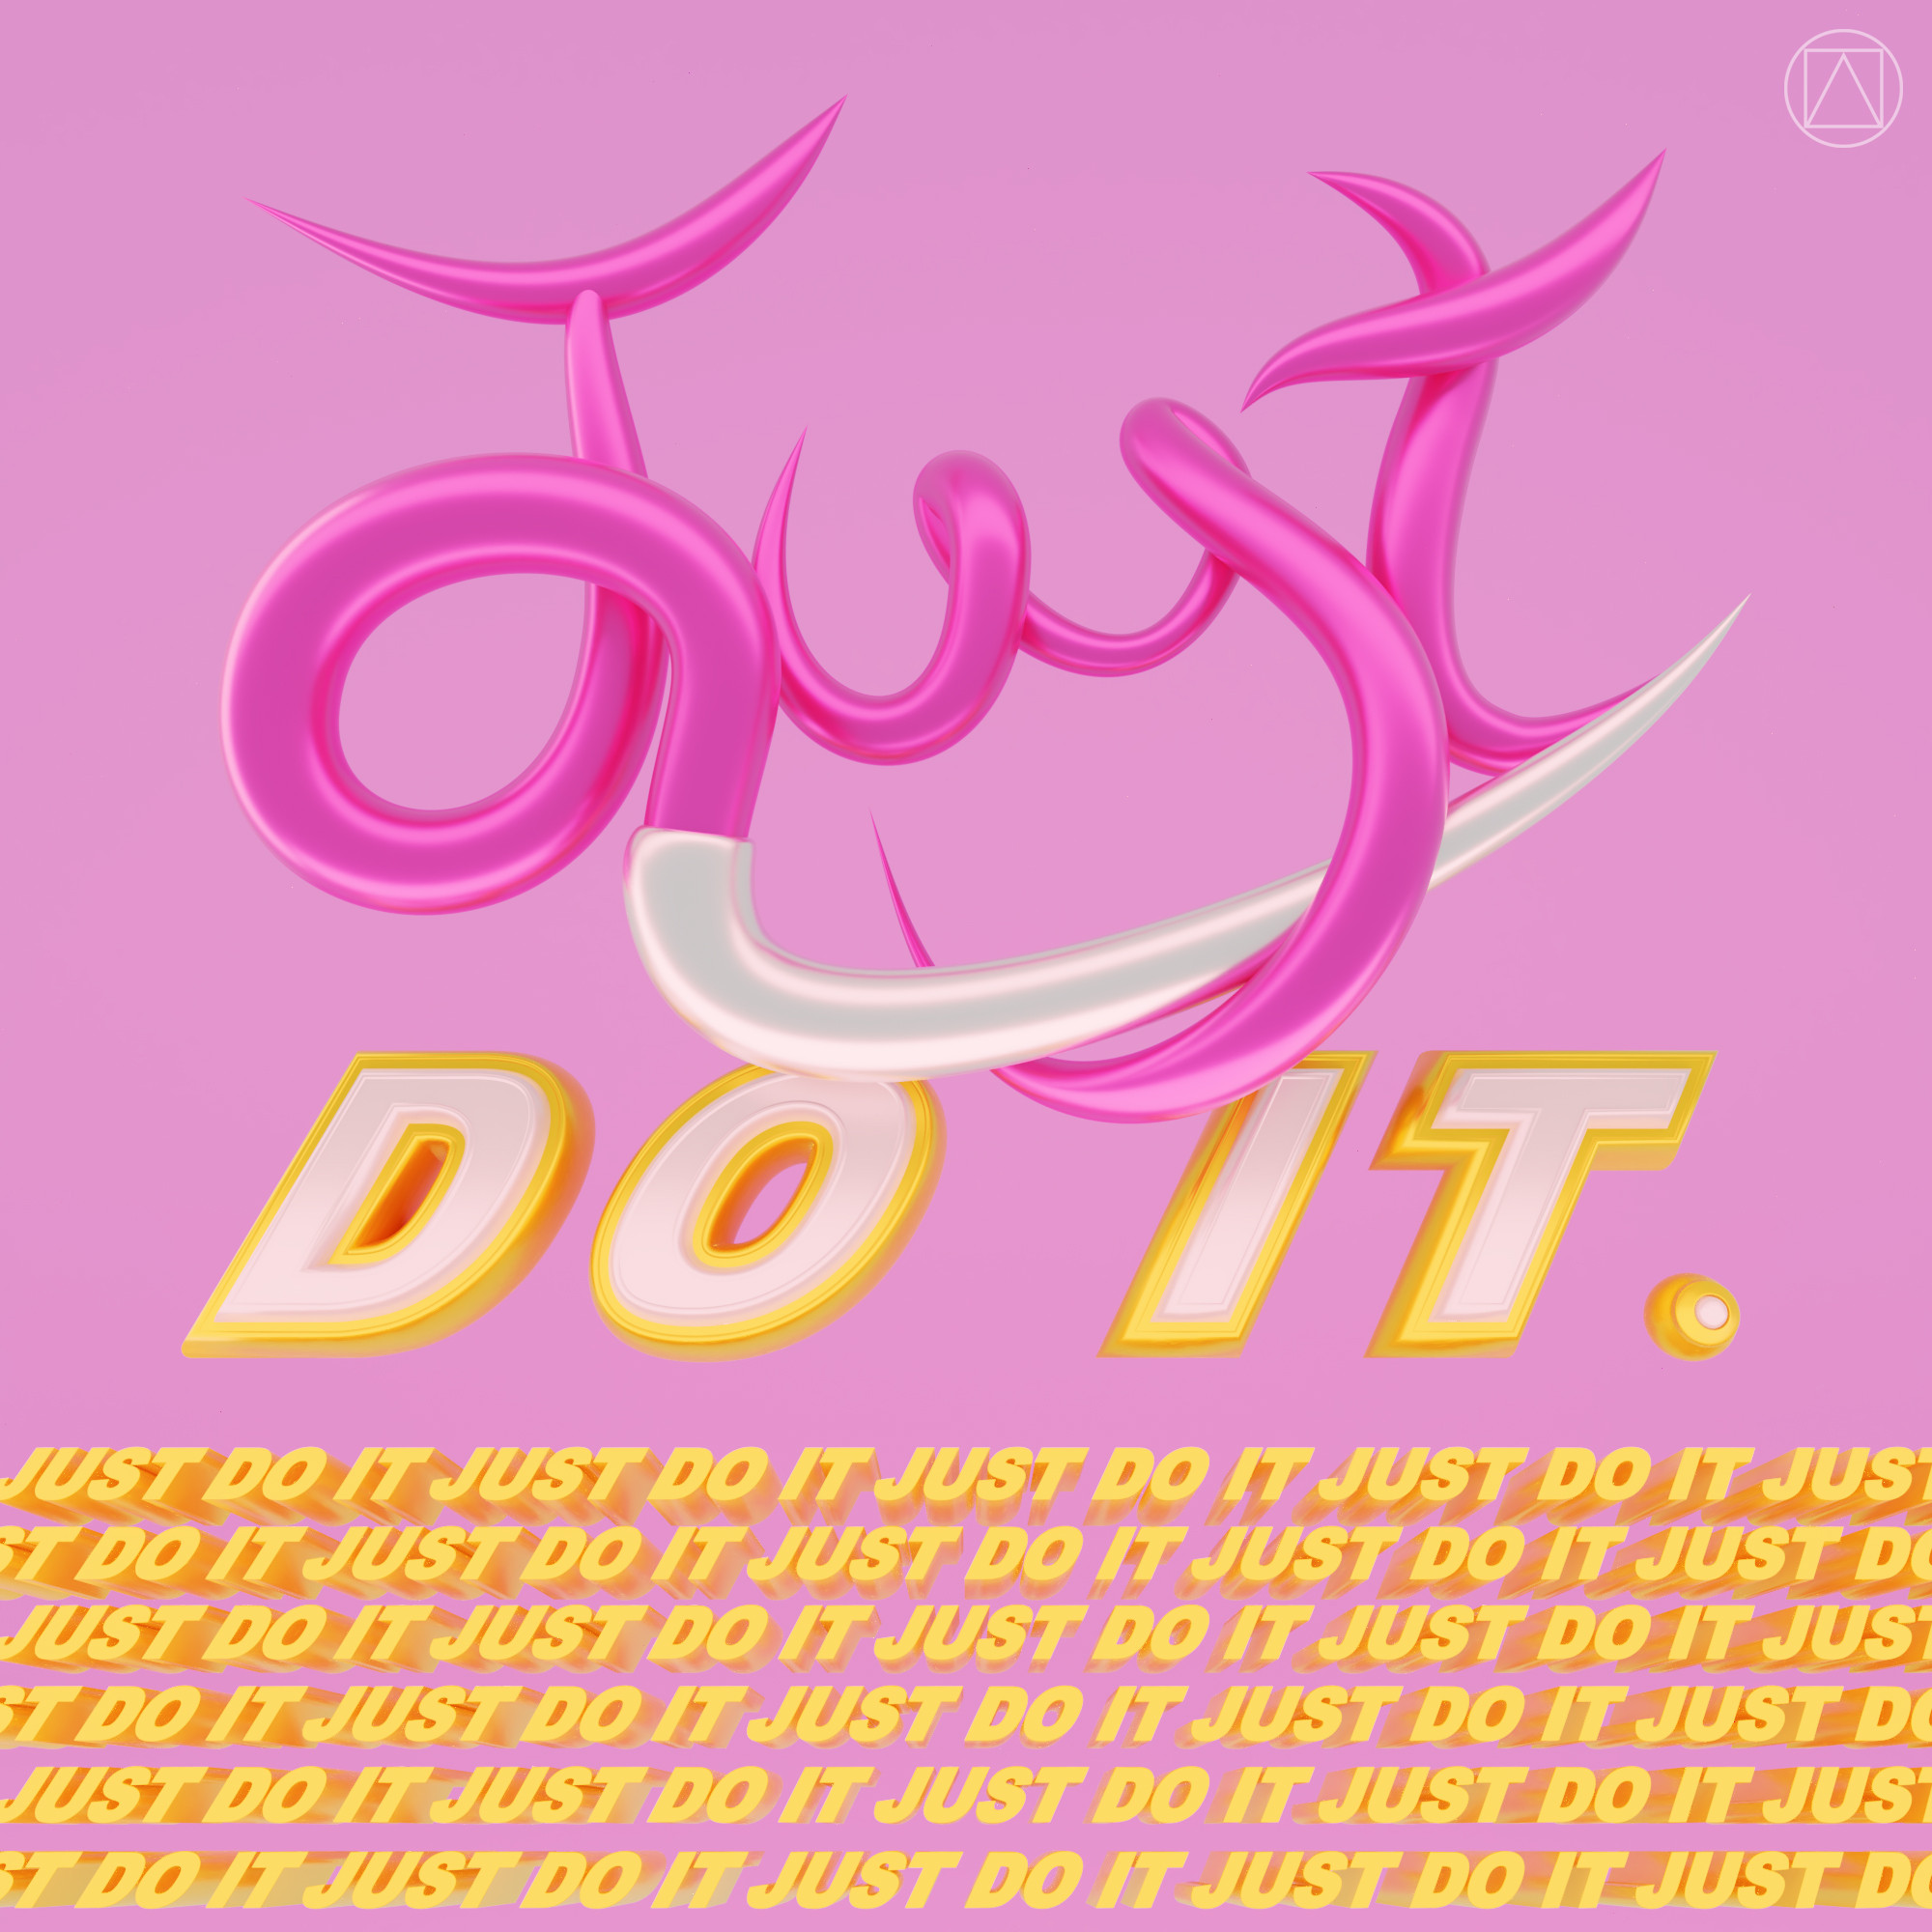 Just do it. - Inspired by Nike brand